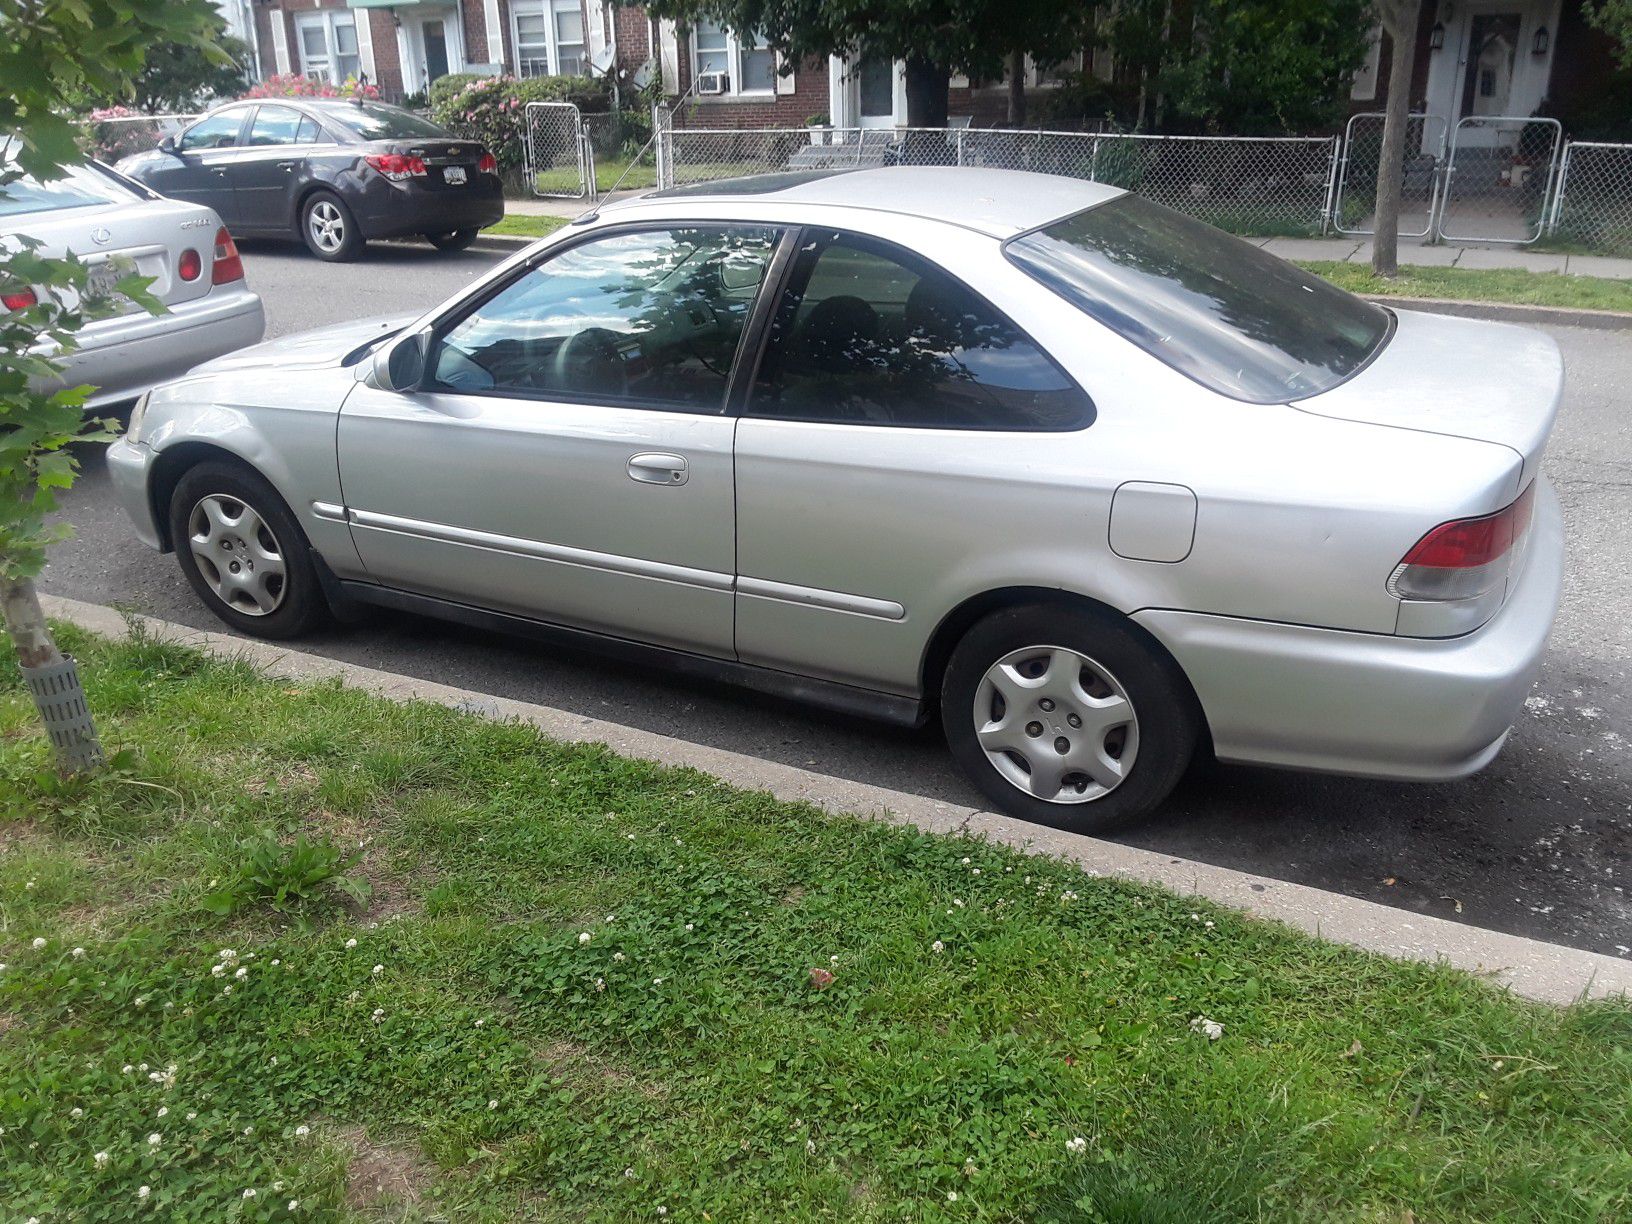 Honda civic ex 2000 good condition run good very clean with only 200k ac heat work fine